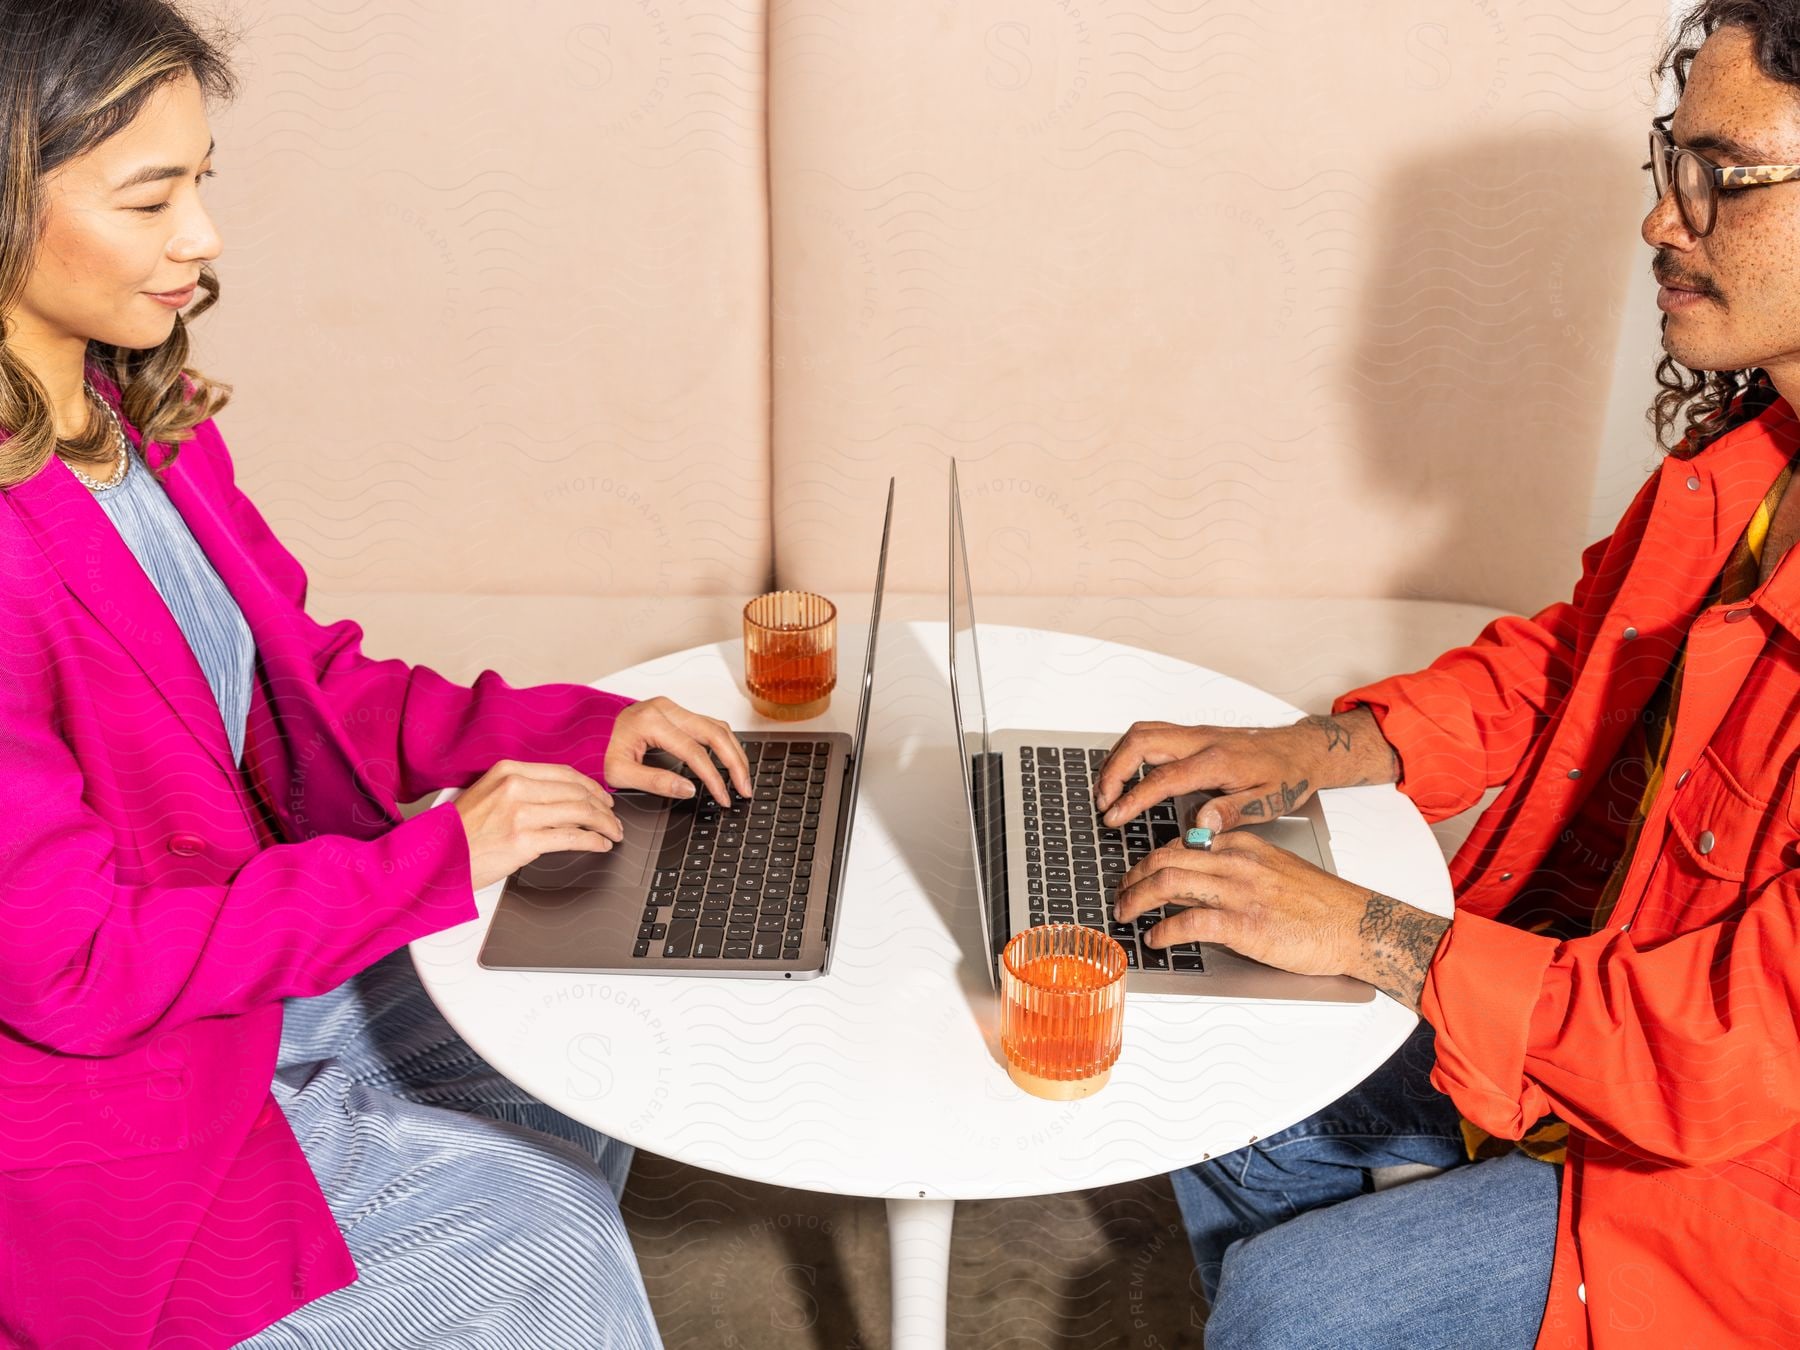 A man and a woman sitting at a table typing on laptops.